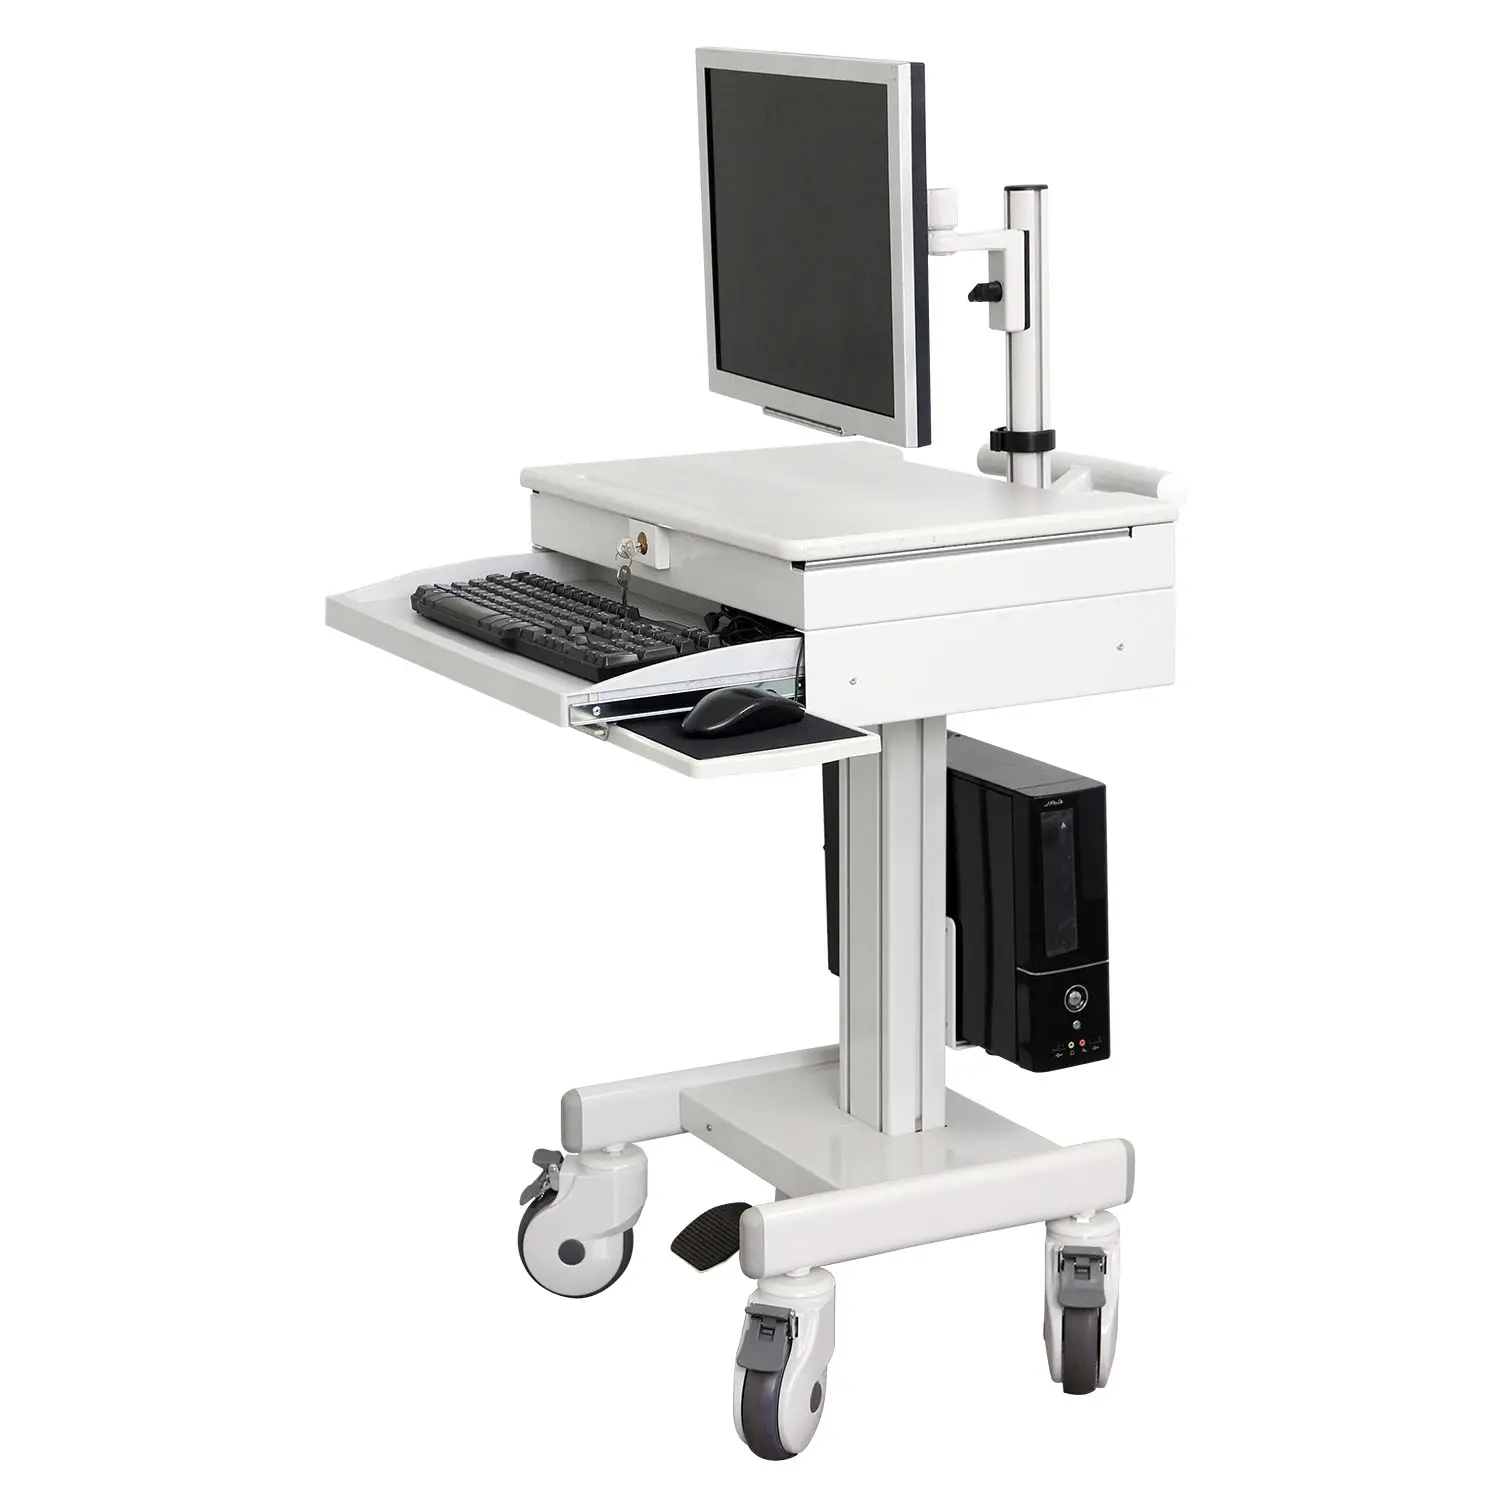 Medical computing cart Hospital Monitor Trolley for Medical Workstation Cart with LCD monitor arm gas lift cart with cpu holder